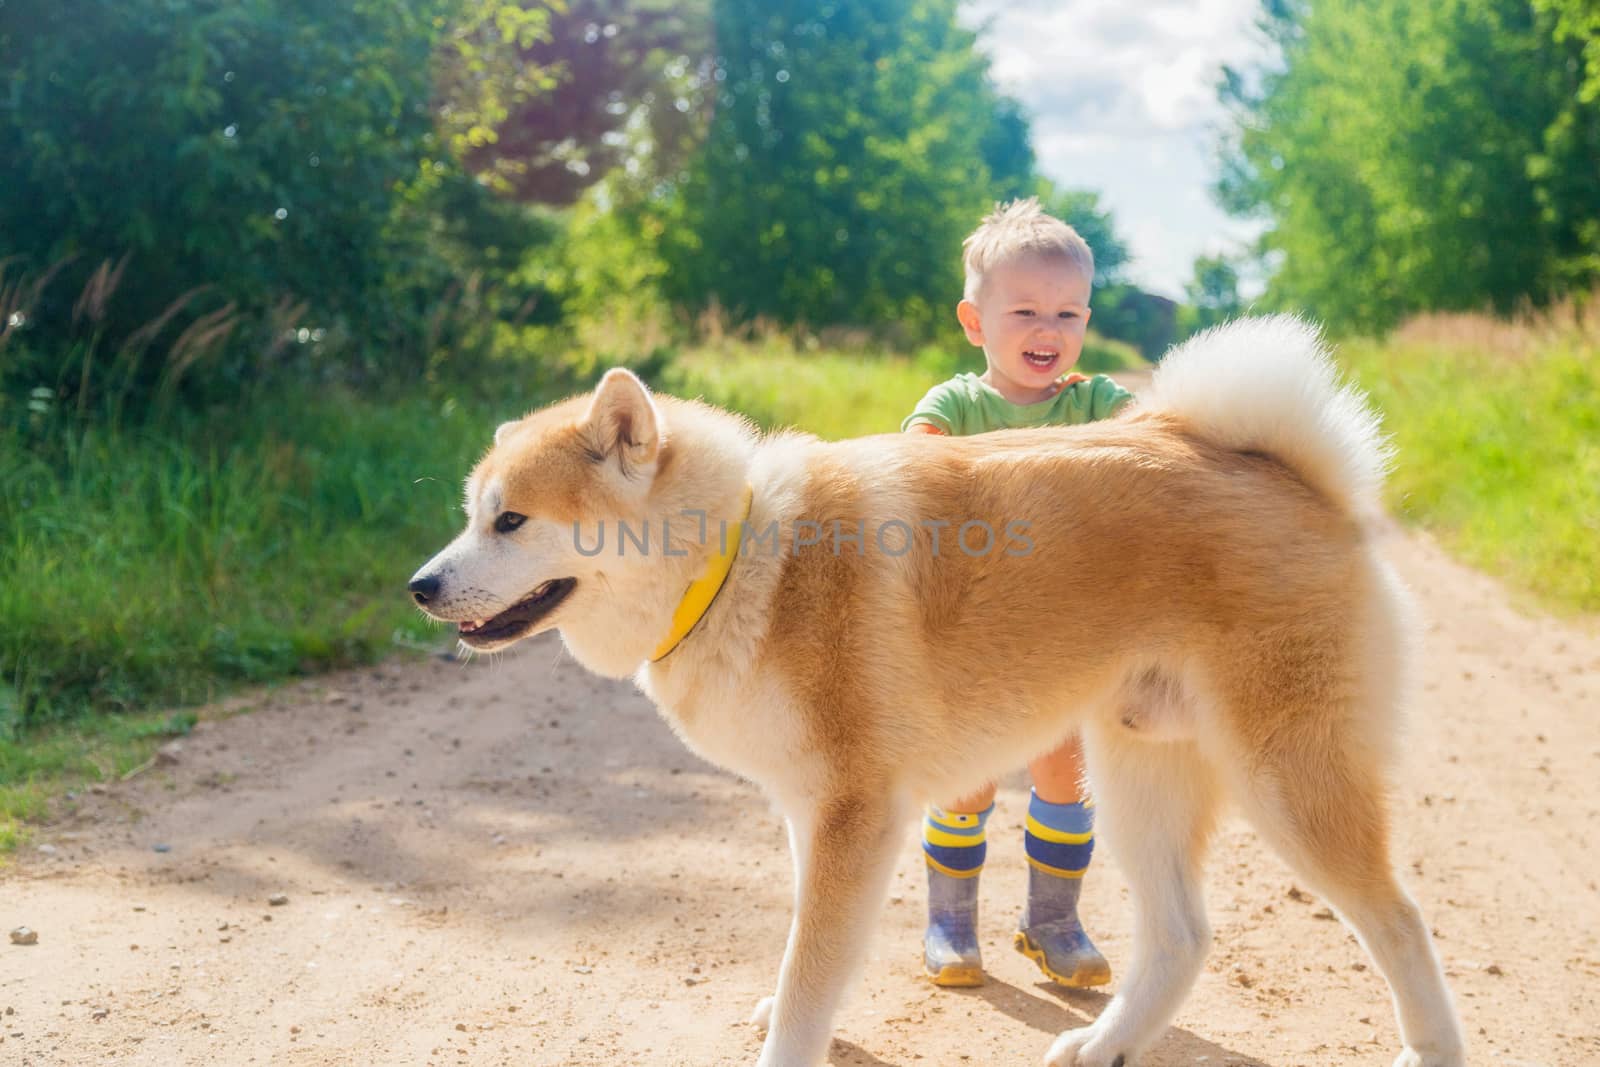 Little Boy and Akito Inu Dog on a Country Country Road